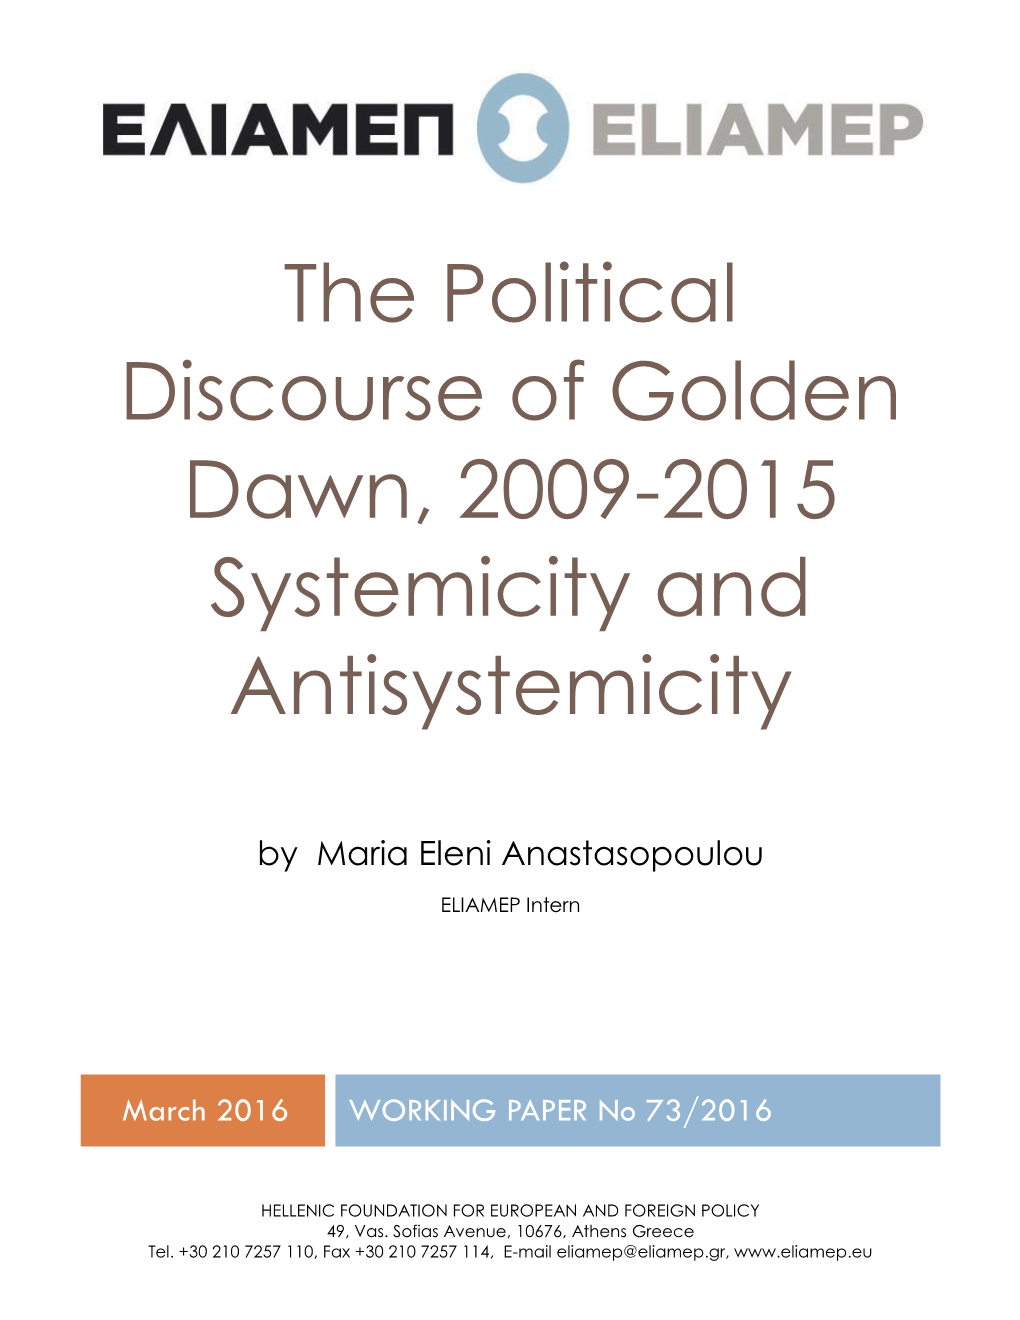 The Political Discourse of Golden Dawn, 2009-2015 Systemicity and Antisystemicity